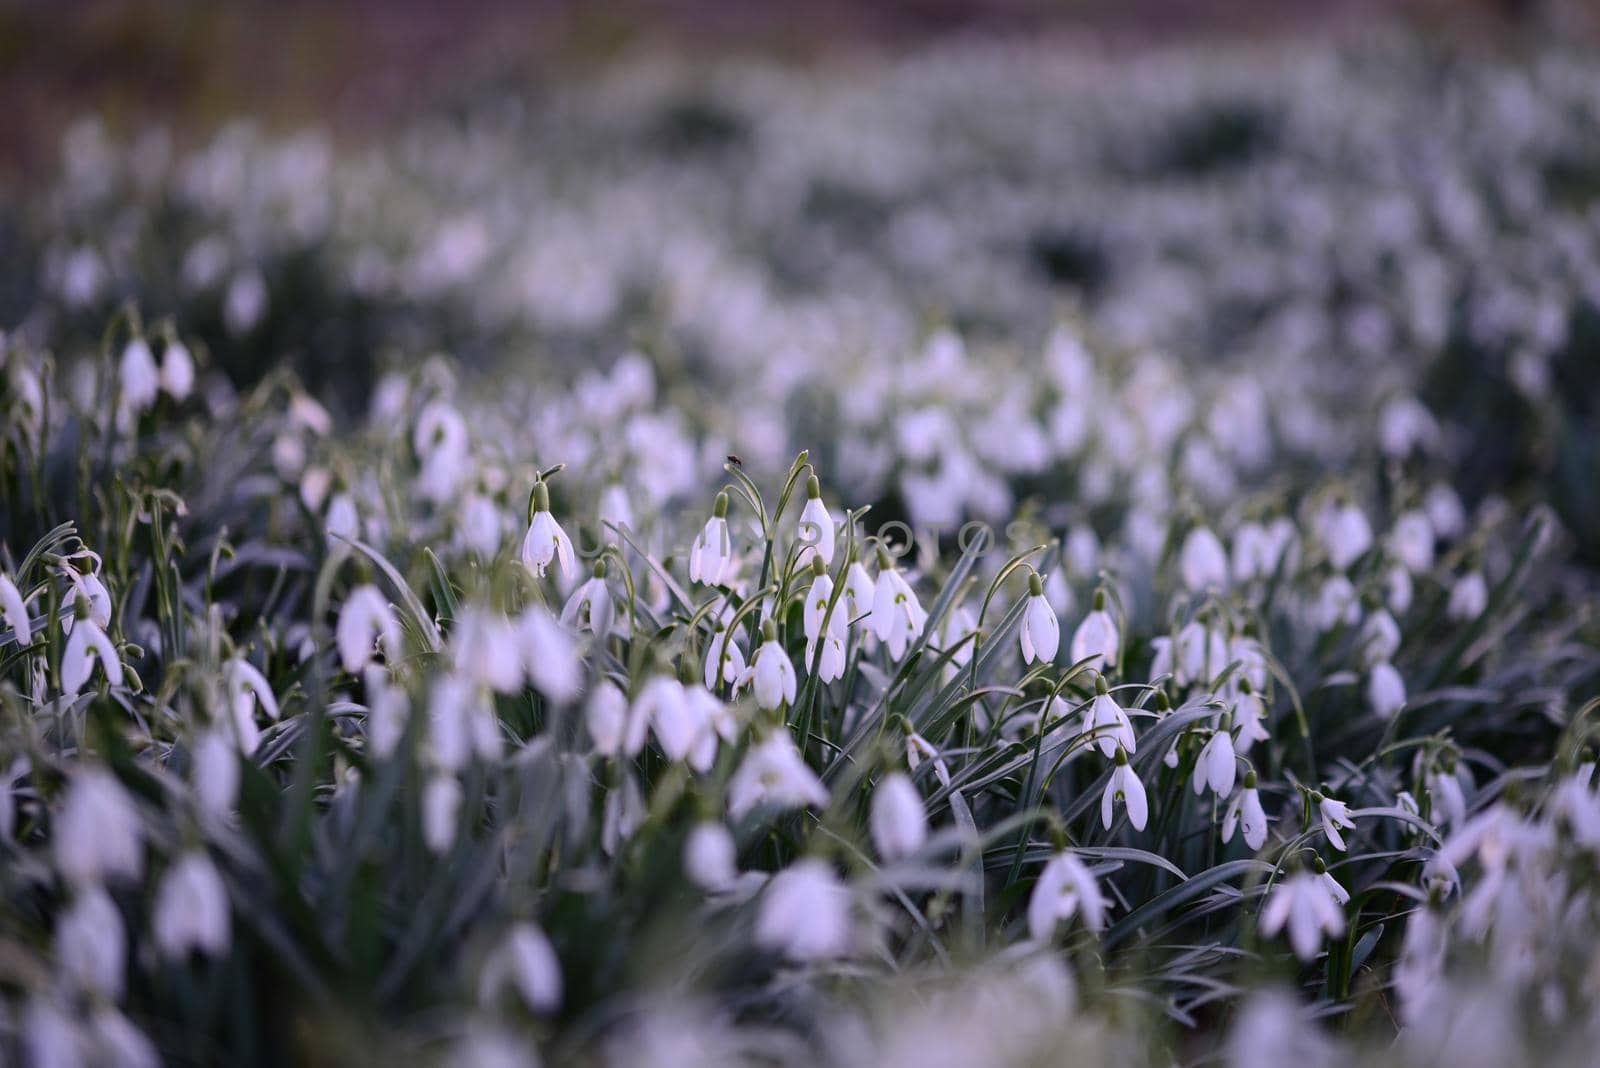 Snowdrop field - Galanthus - as a close up by Luise123